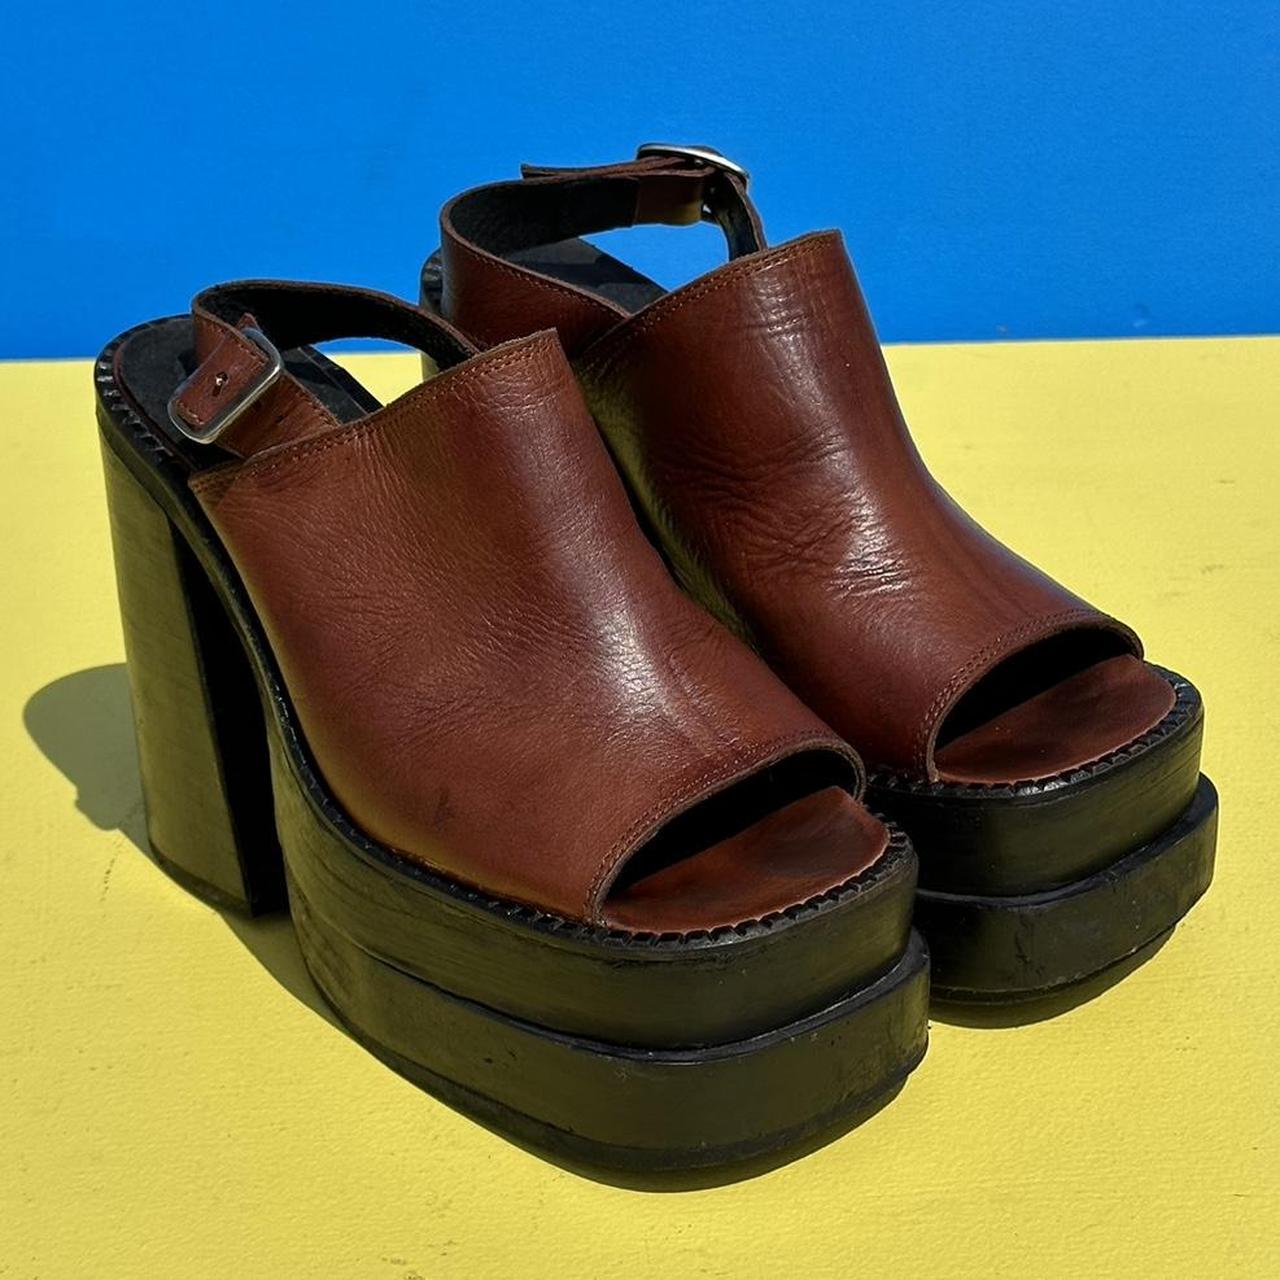 Women's Black and Brown Sandals